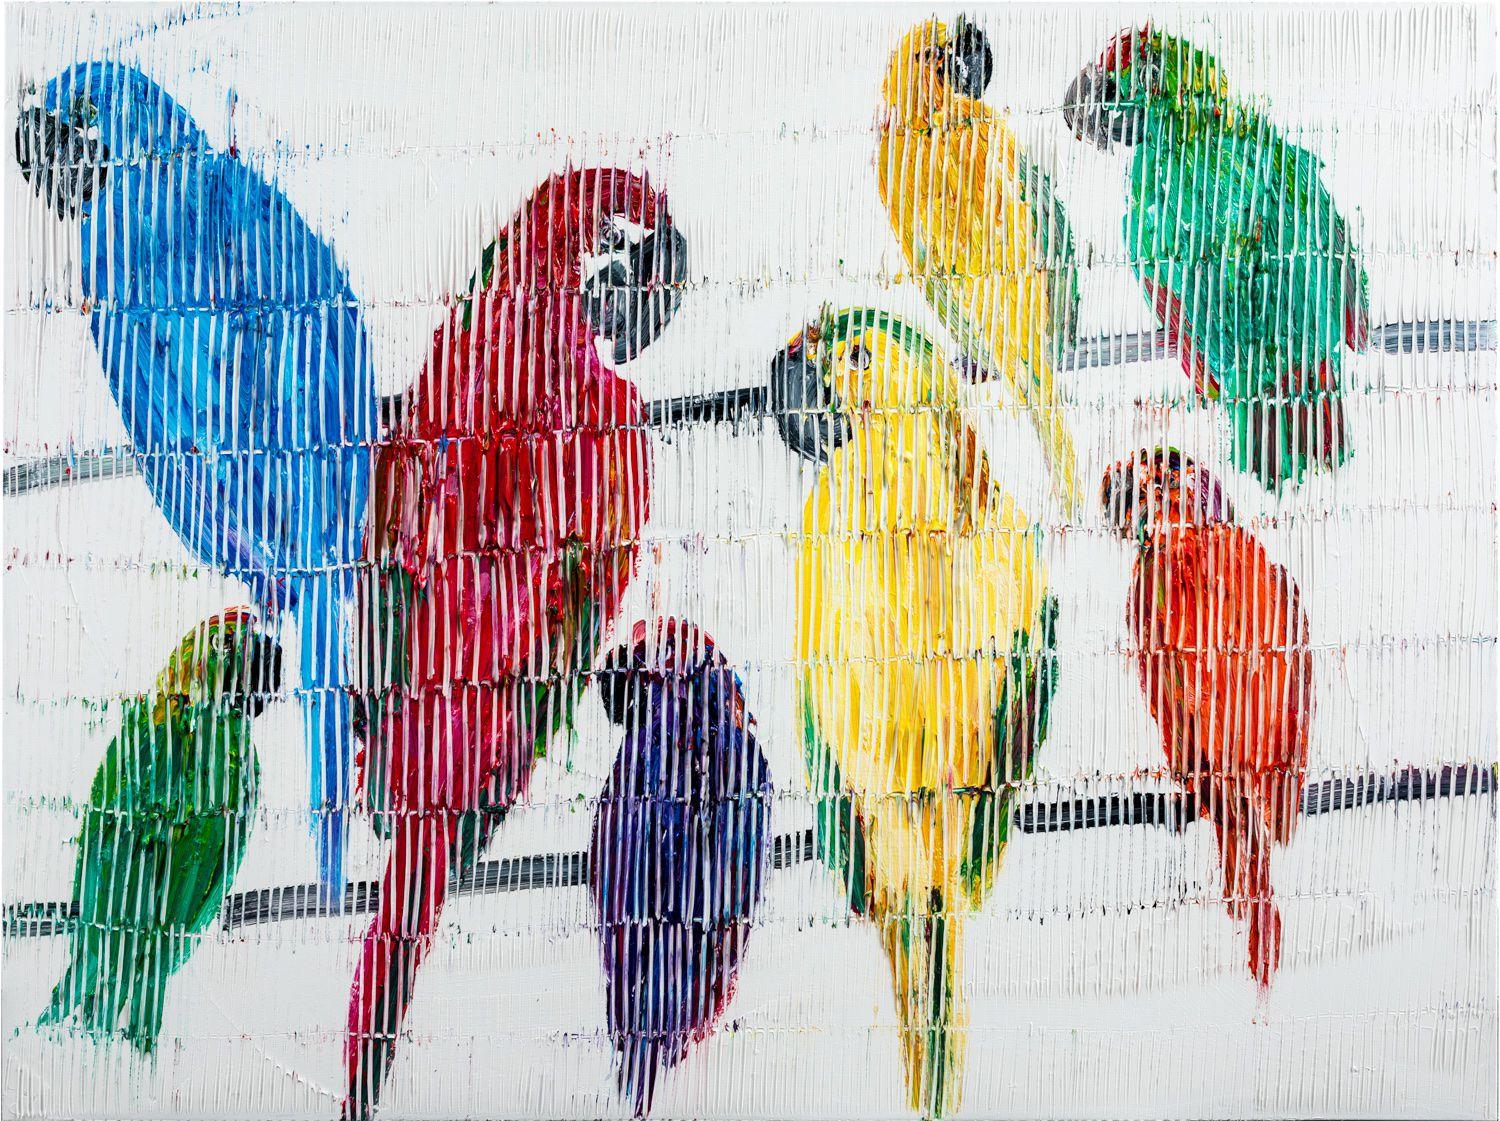 Macaws and Amazon Aviary  - Painting by Hunt Slonem